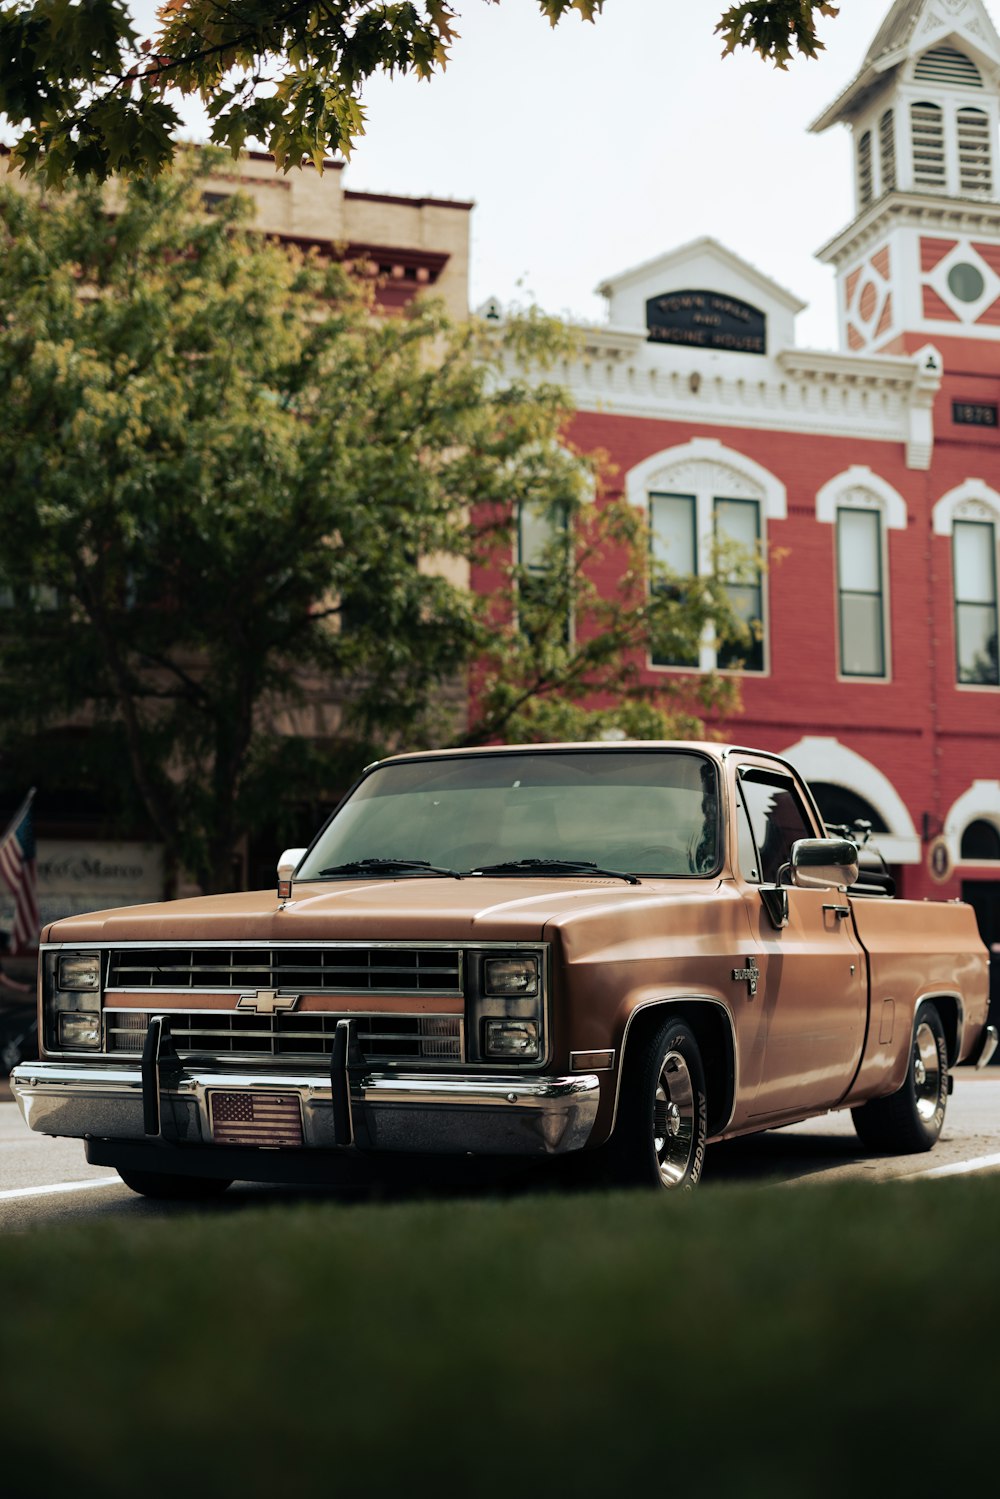 a brown truck parked in front of a red building